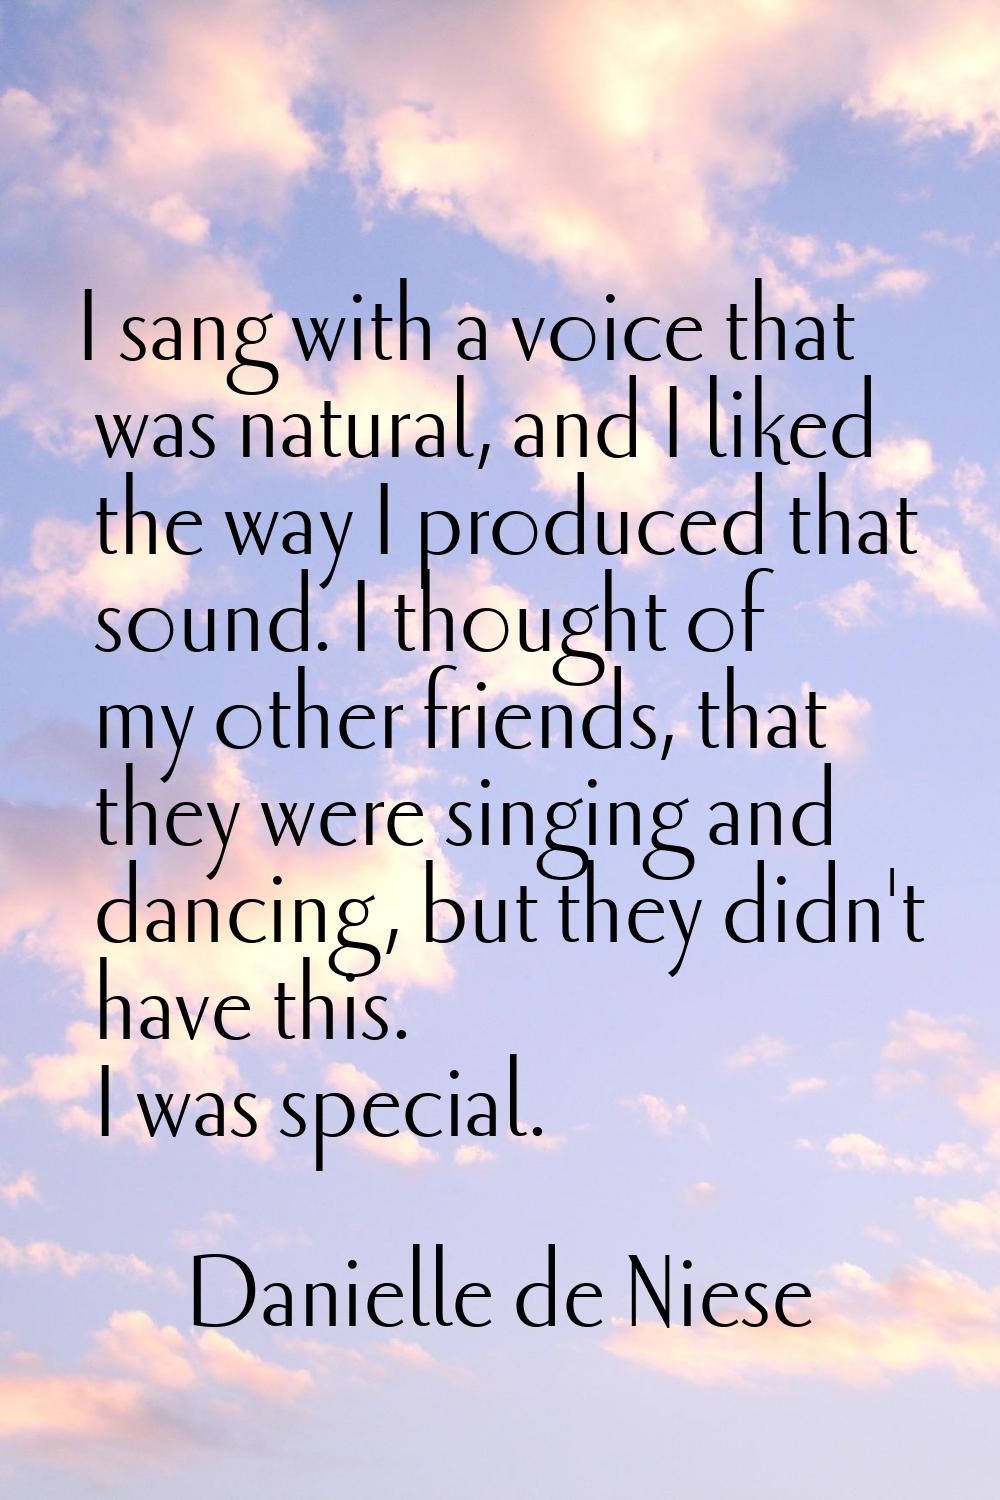 I sang with a voice that was natural, and I liked the way I produced that sound. I thought of my ot